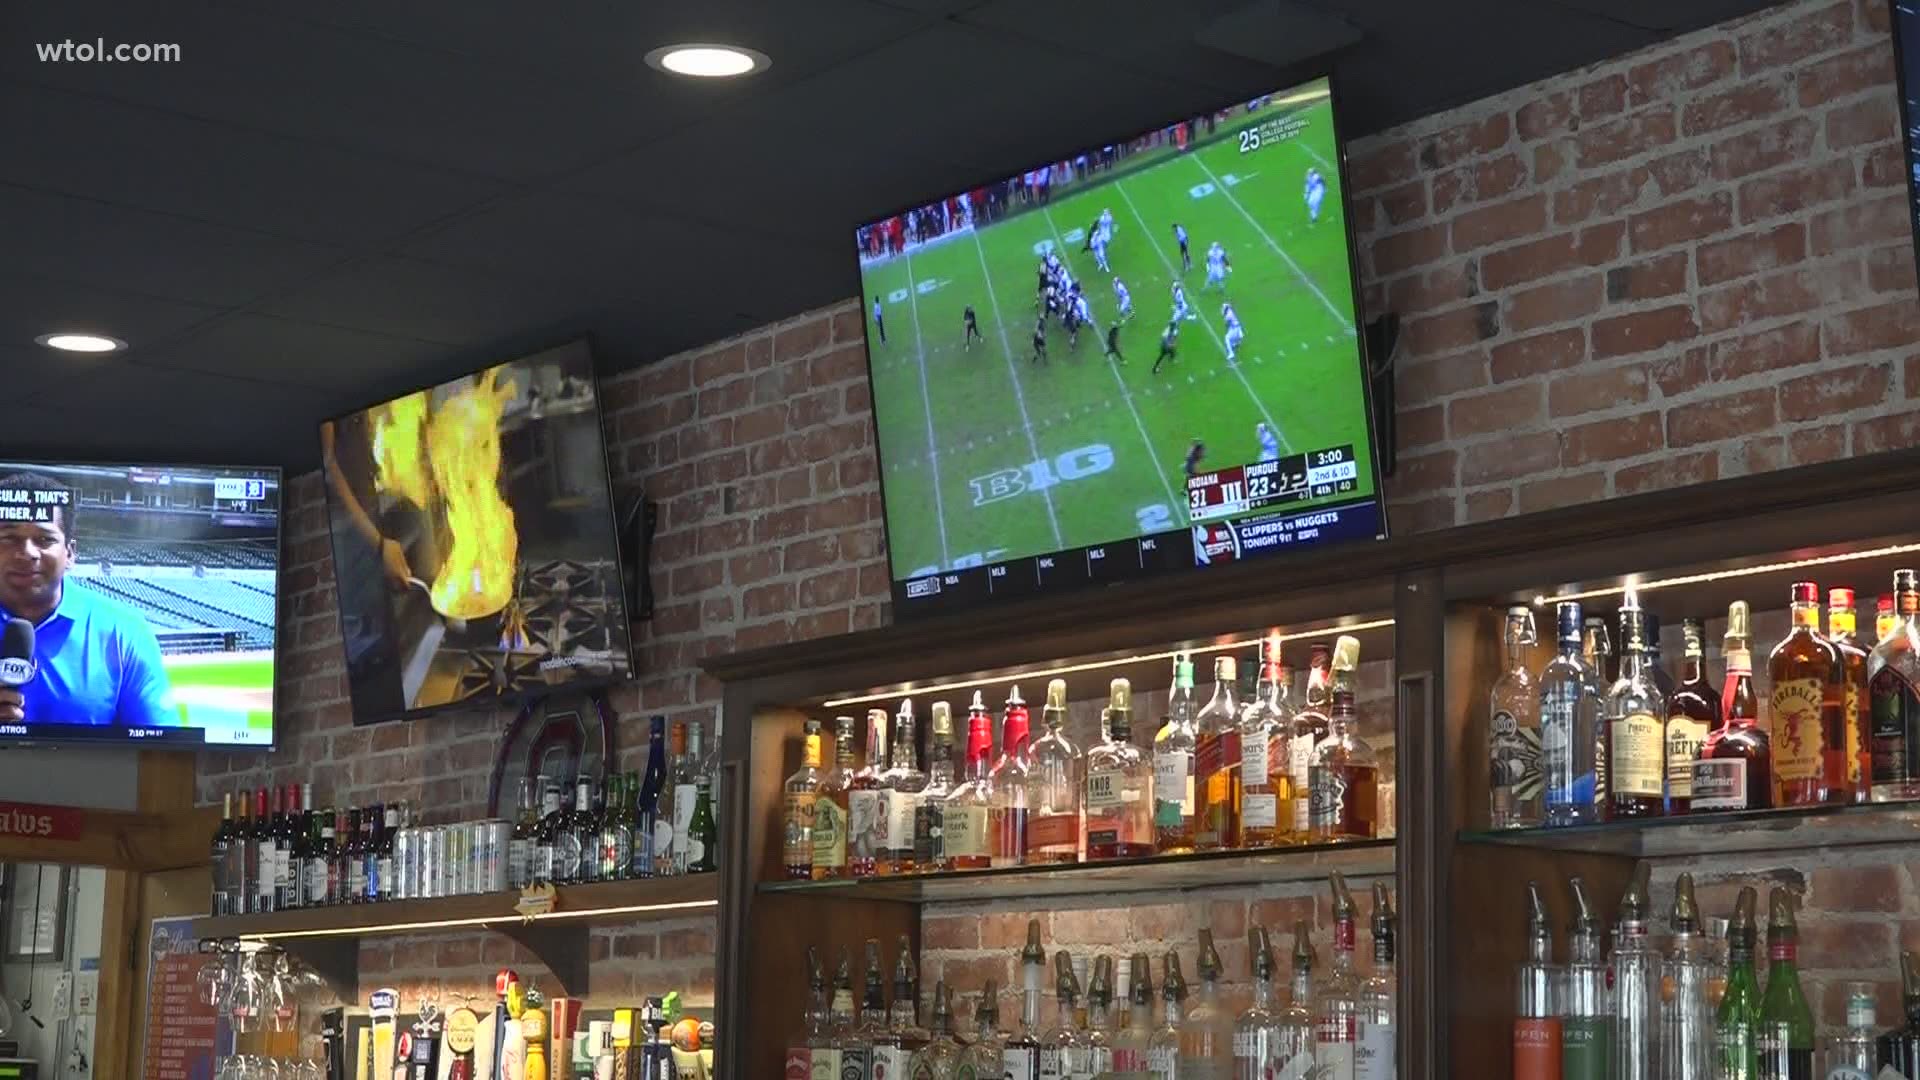 Bars would normally be packed with Ohio State fans during a big game like Monday's national championship, but the curfew continues to cut profits.